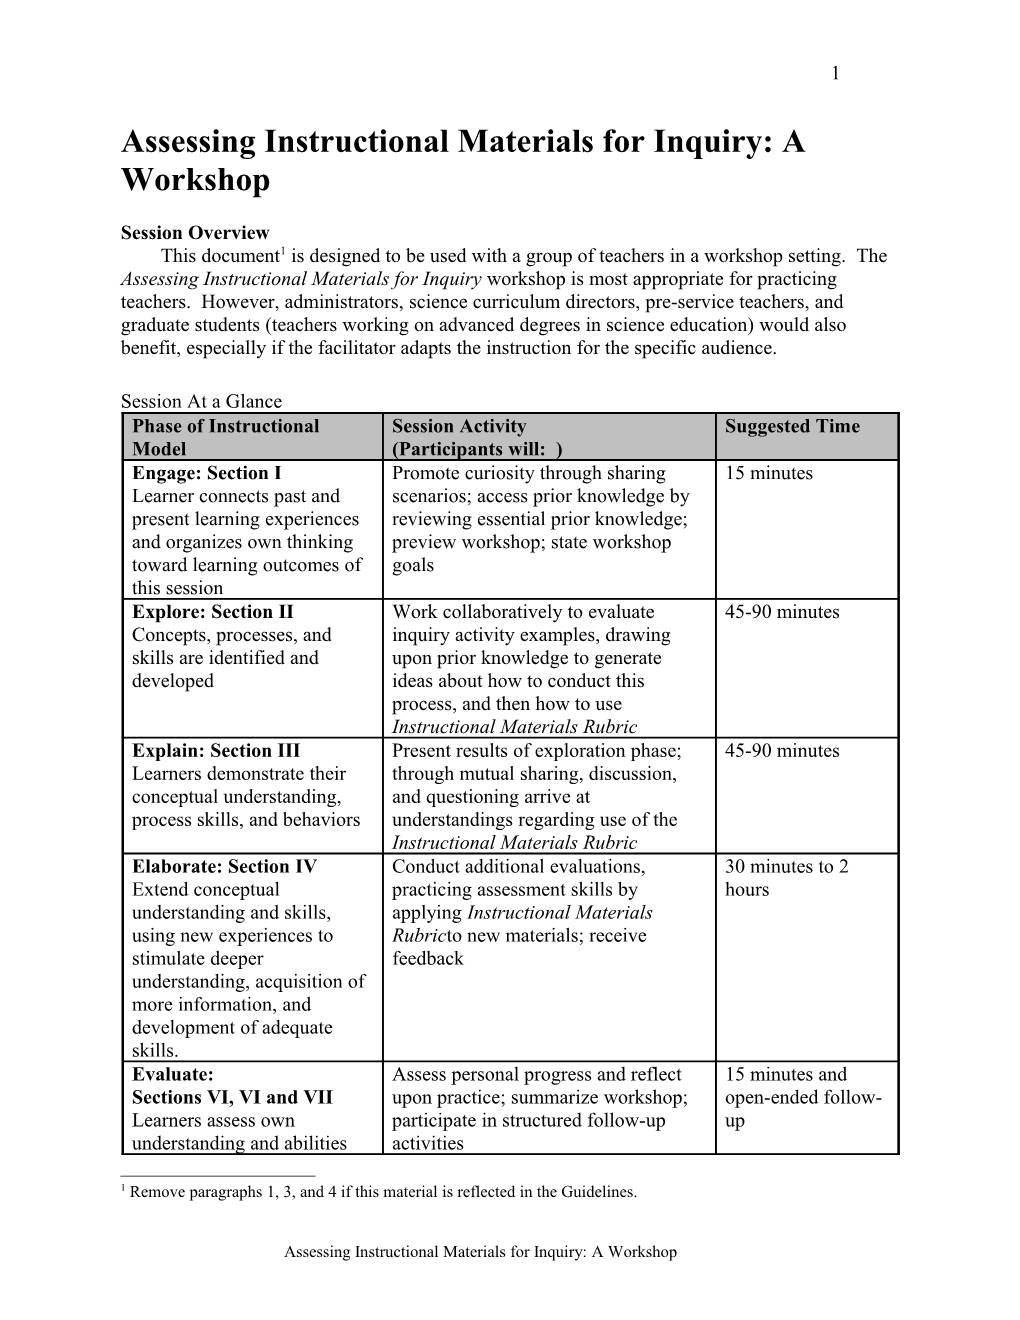 Assessing Instructional Materials for Inquiry: a Workshop